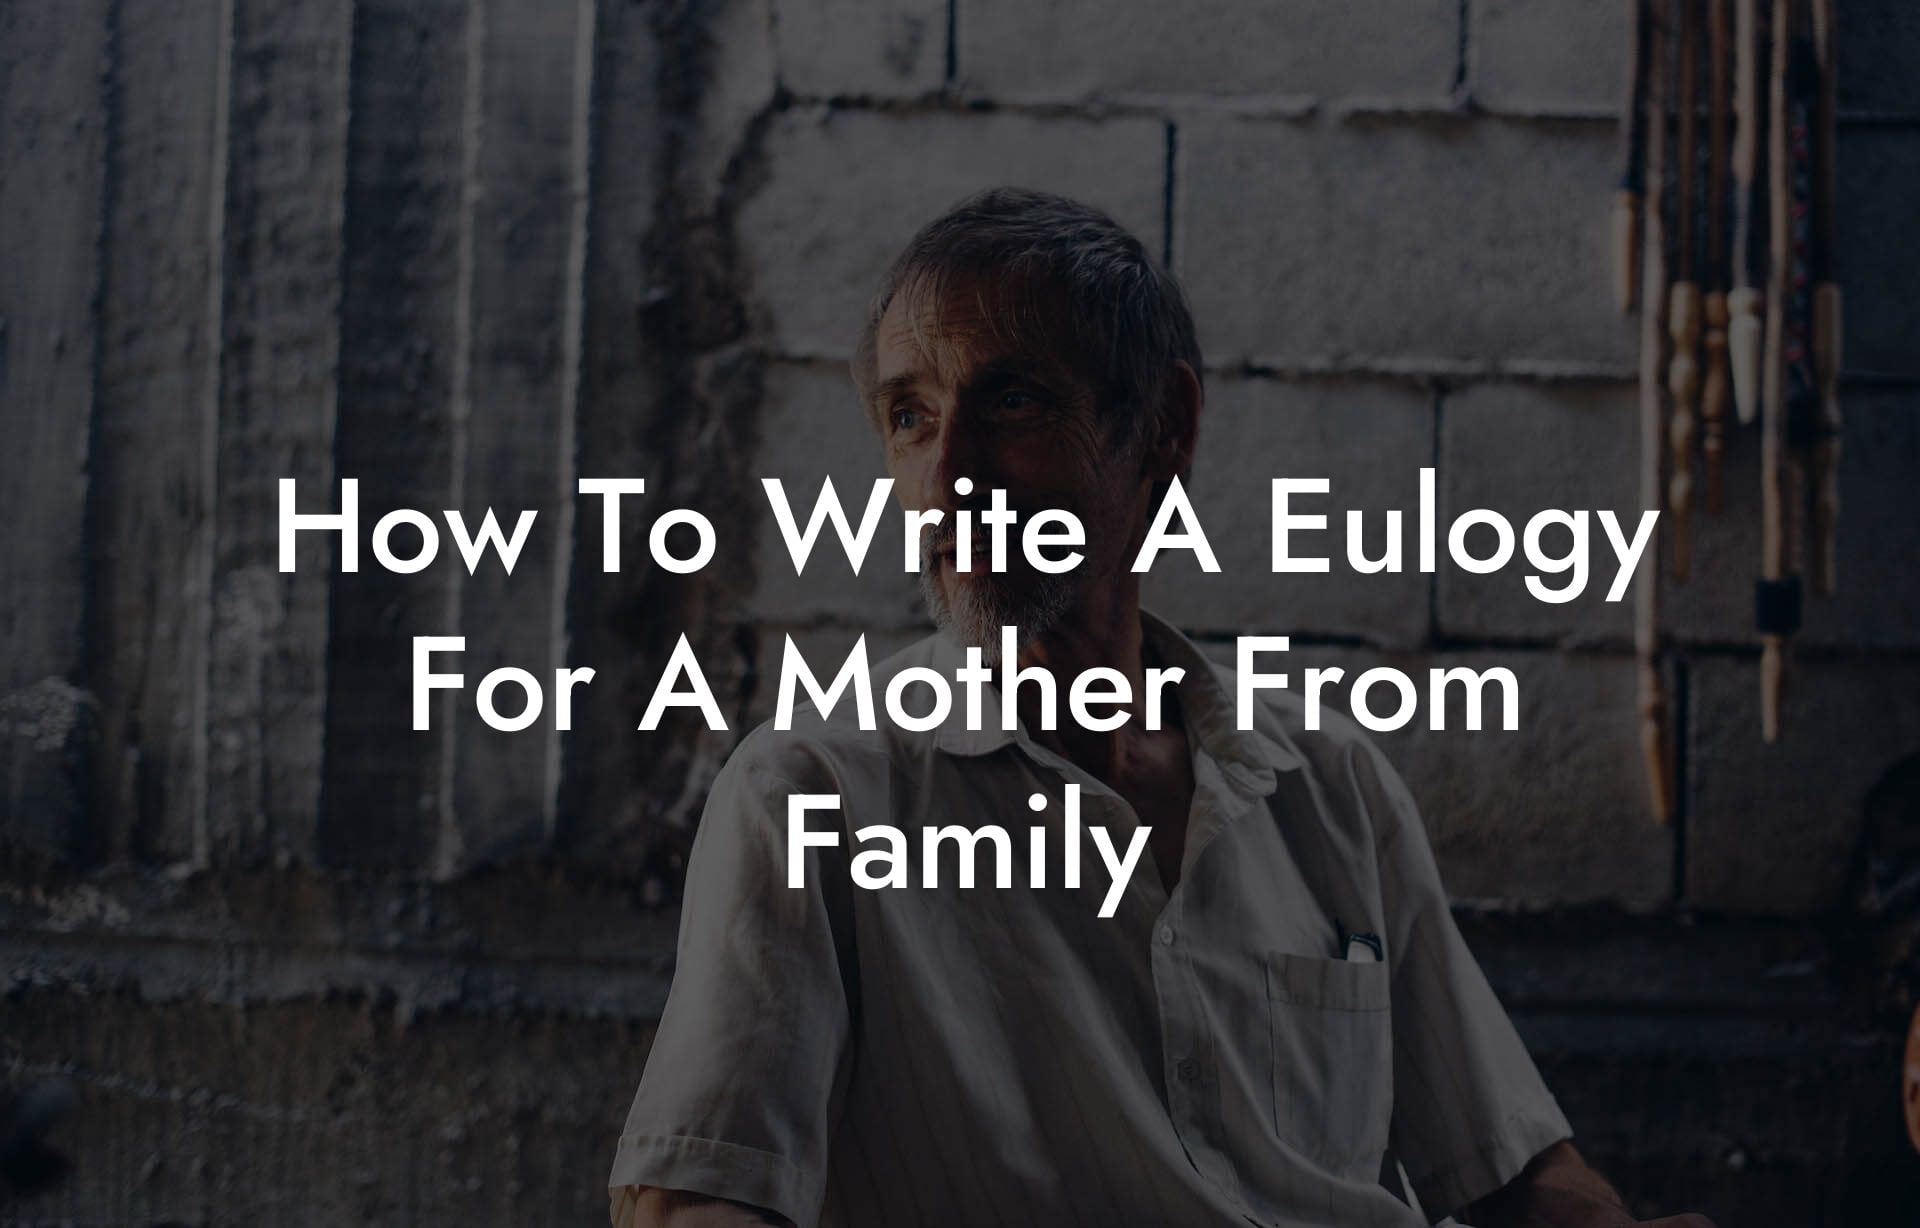 How To Write A Eulogy For A Mother From Family